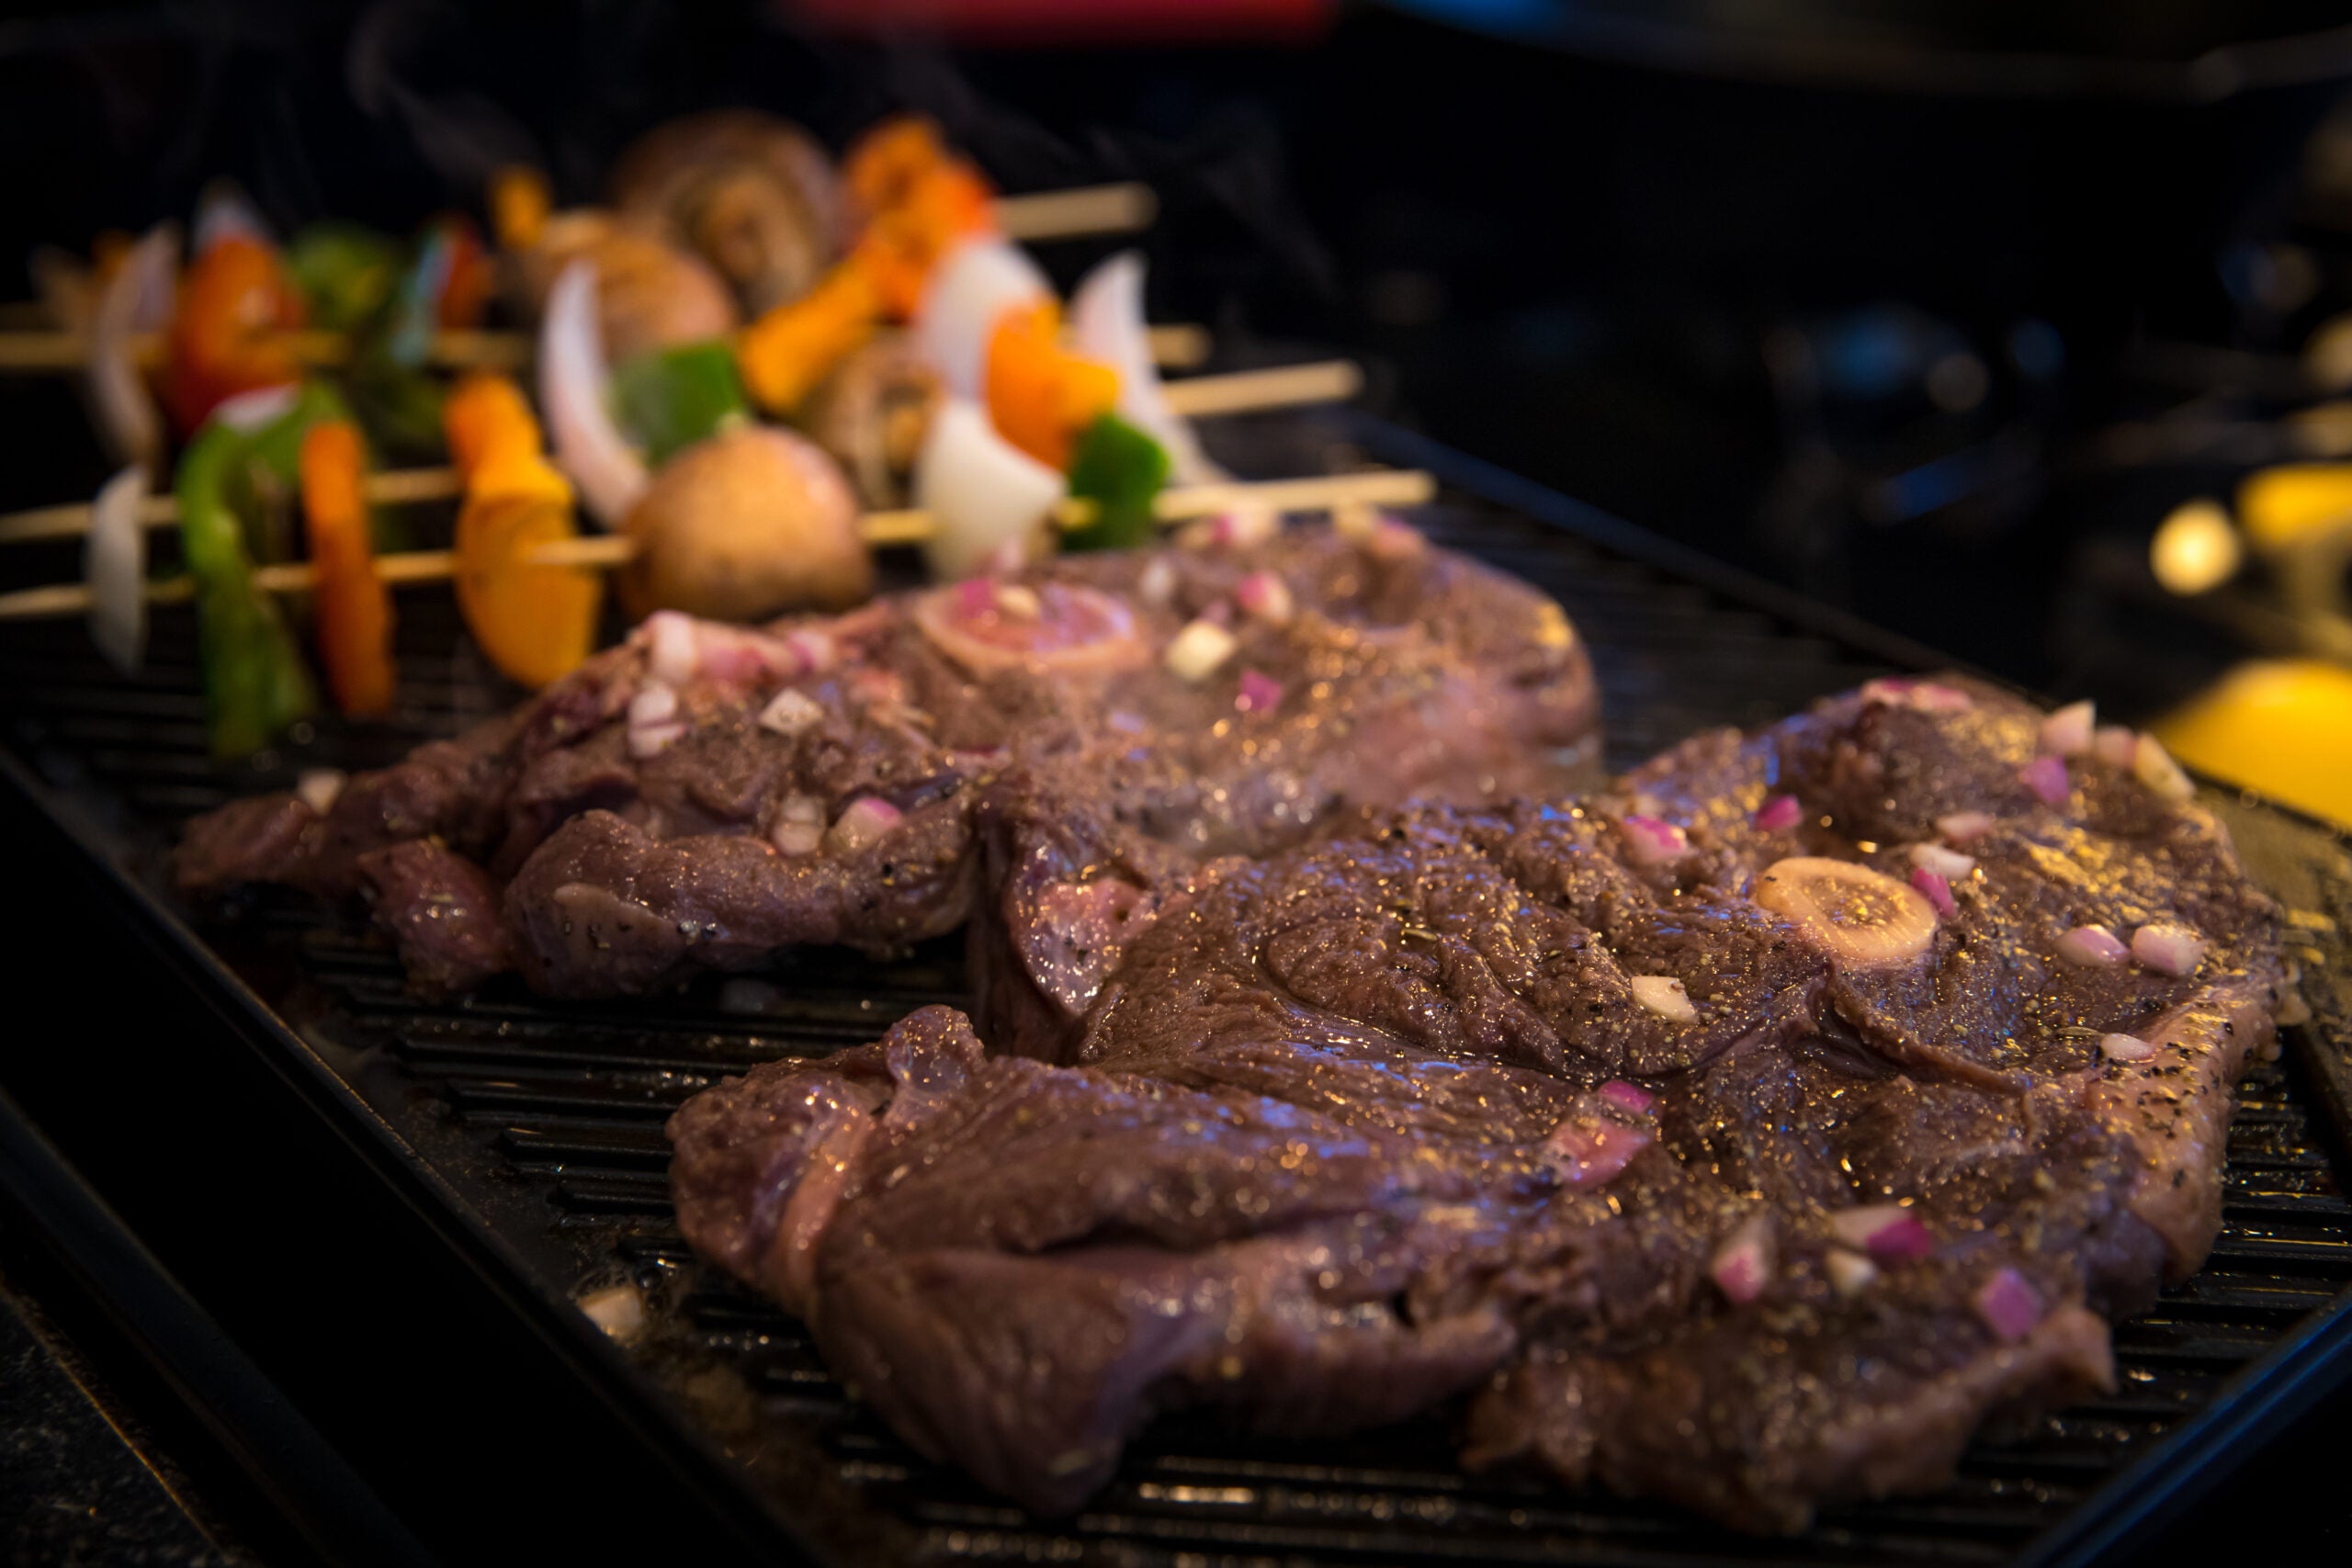 Bear steaks cooking on a grill with vegetable skewers in background